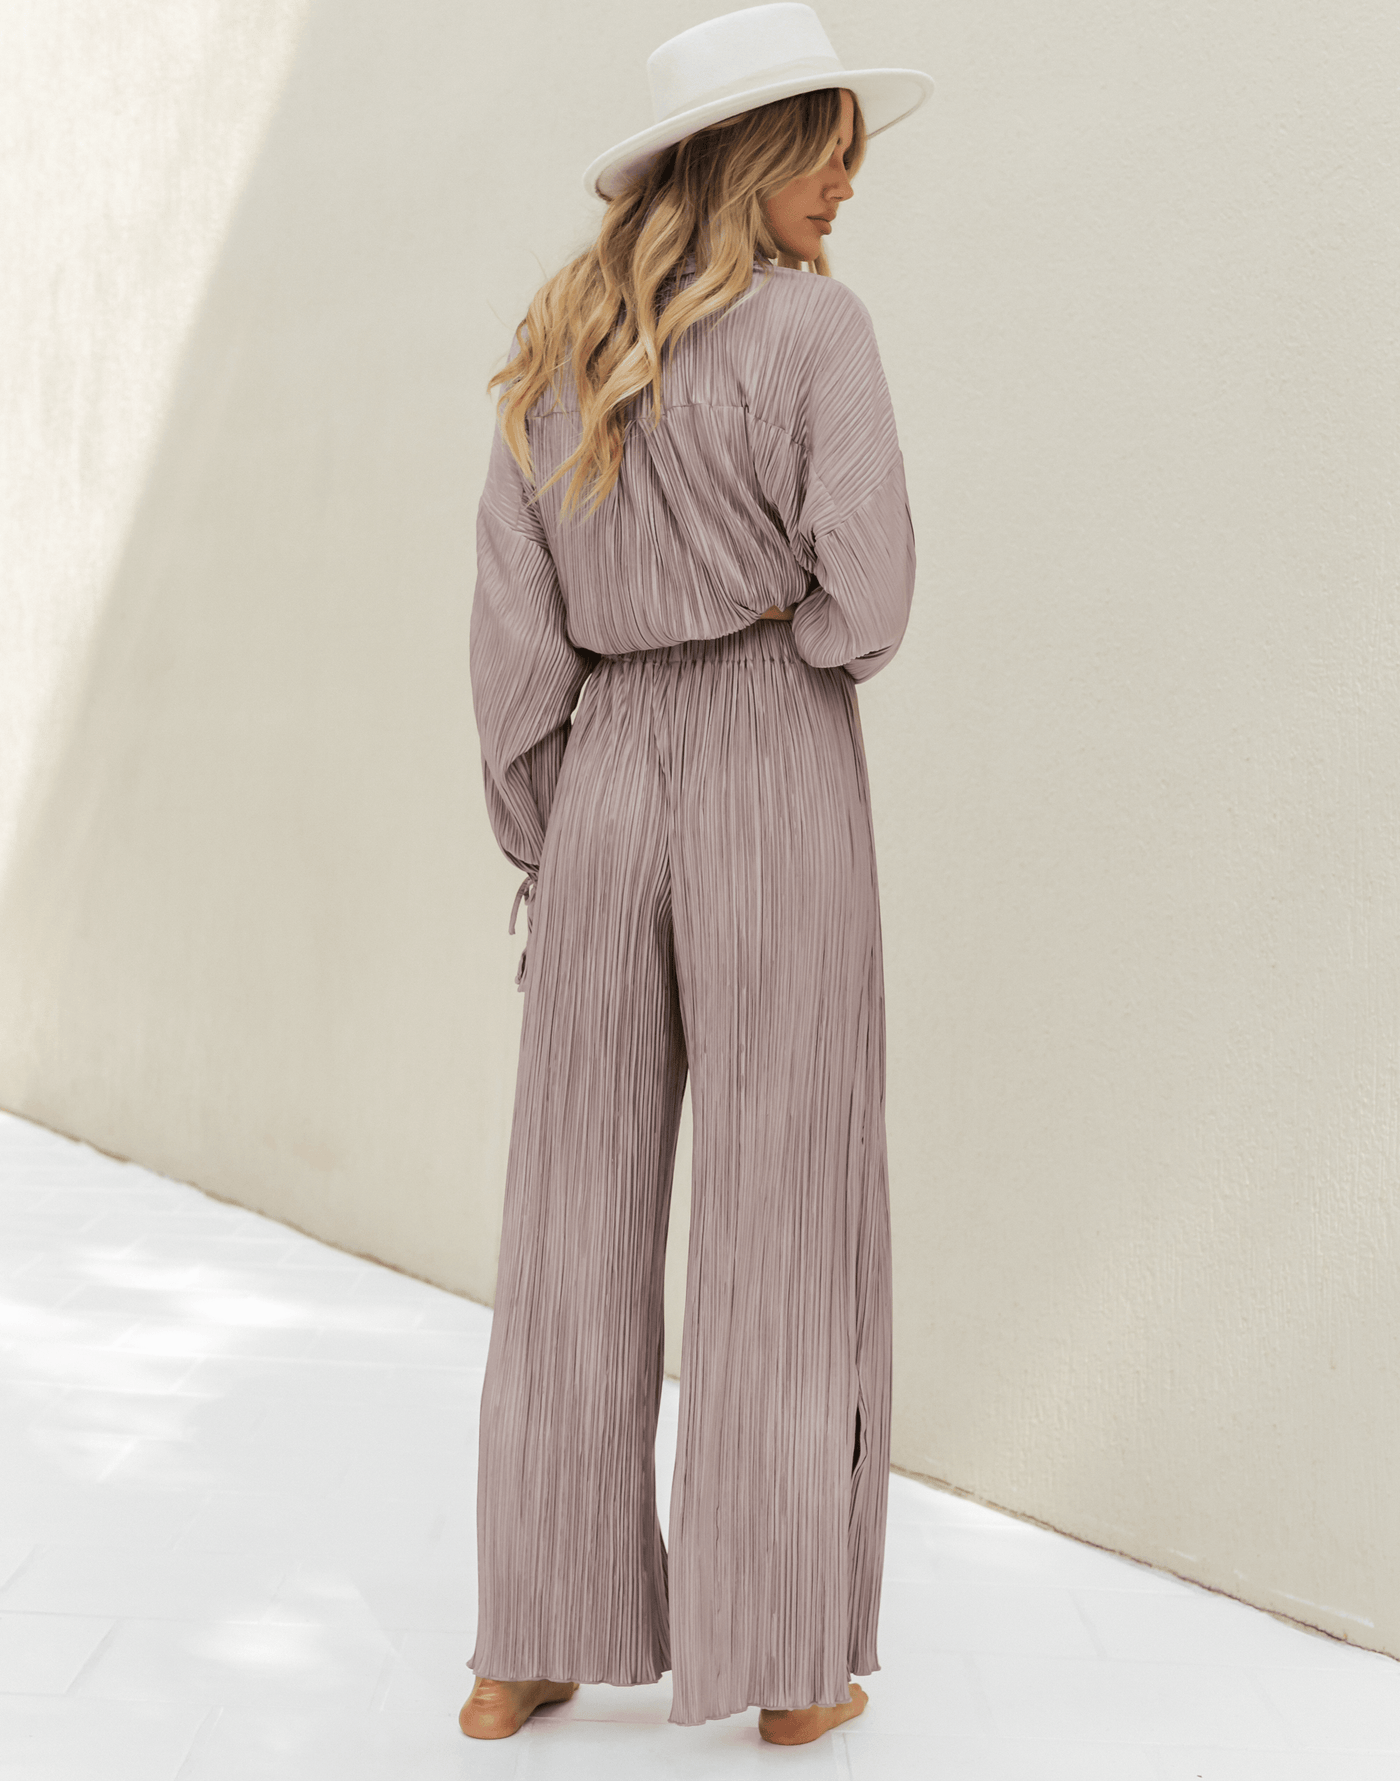 Sweet Serenity Pants (Taupe) - Taupe Pleated High Waisted Pants - Women's Pants - Charcoal Clothing